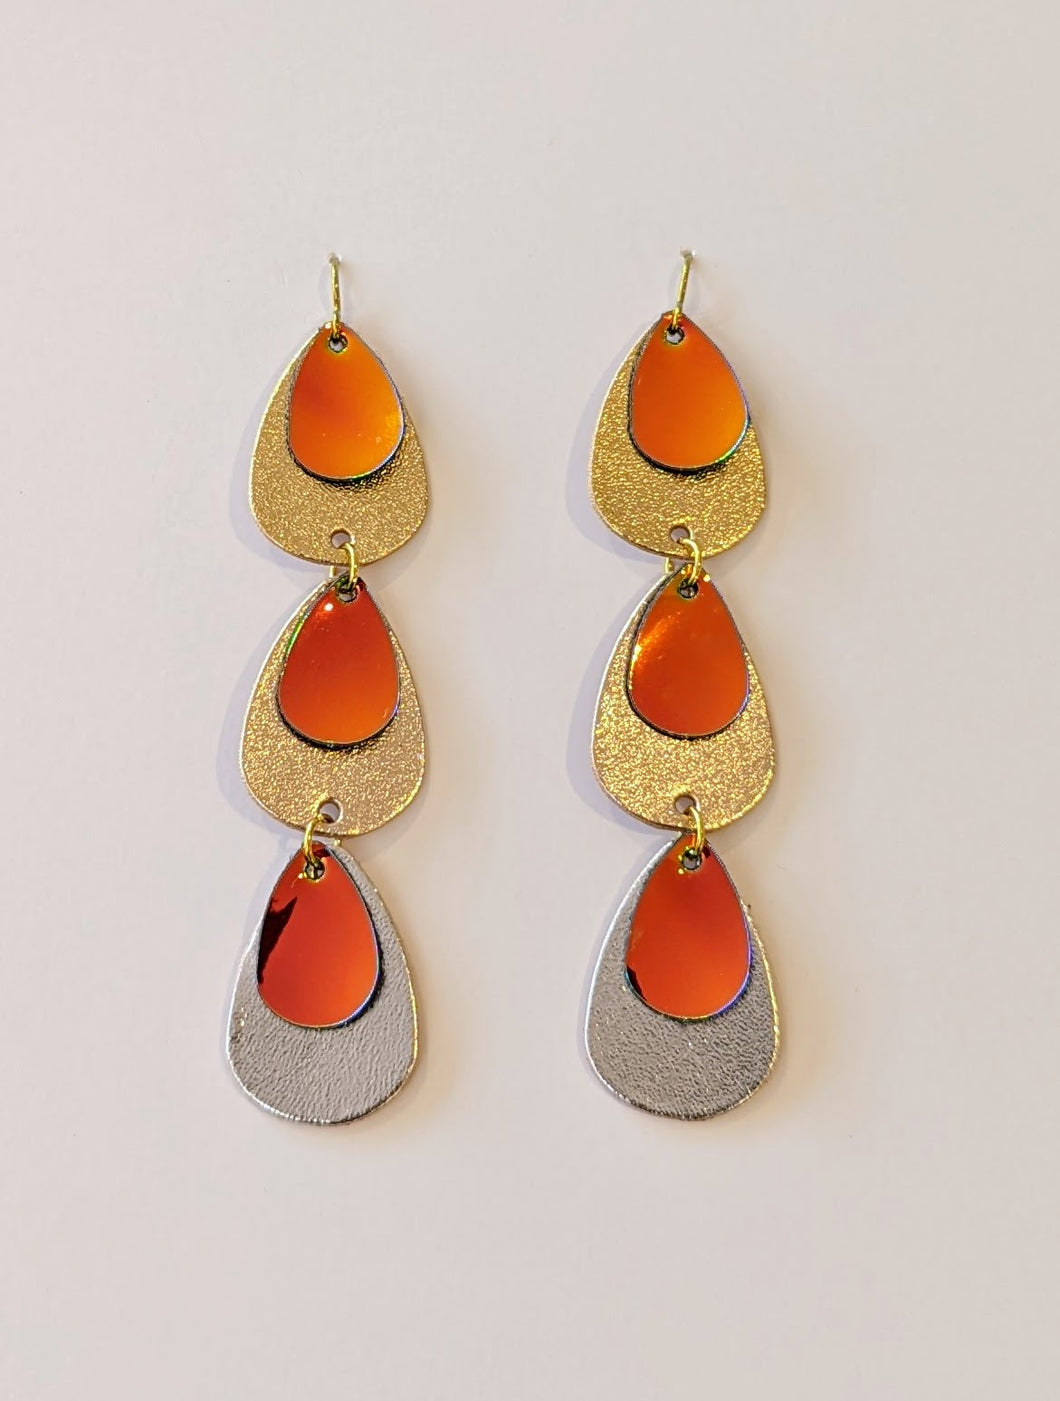 Metallic leather earrings made from silver, gold and rose gold leathers in a long drop shape.